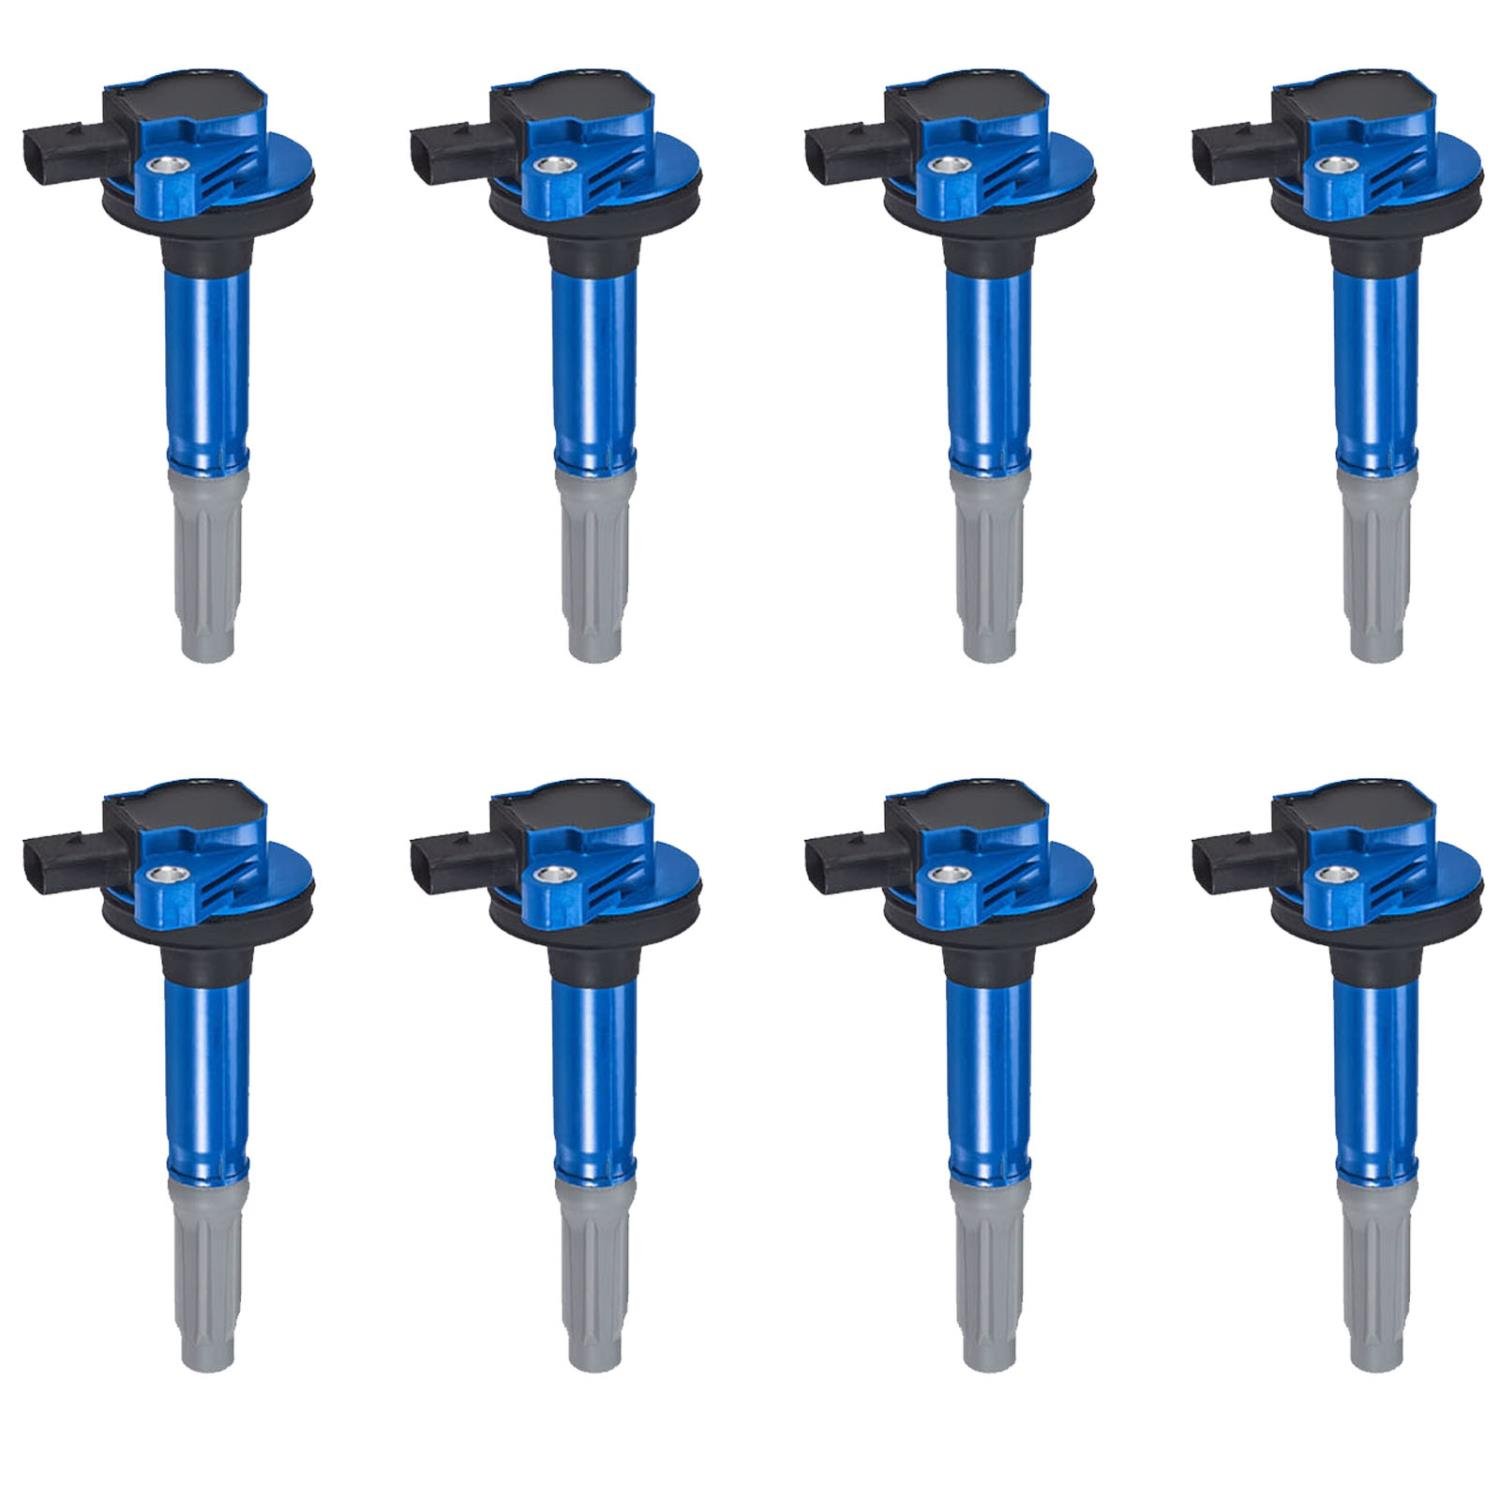 High-Performance Ignition Coils for Ford F-150 5.0L [Blue]